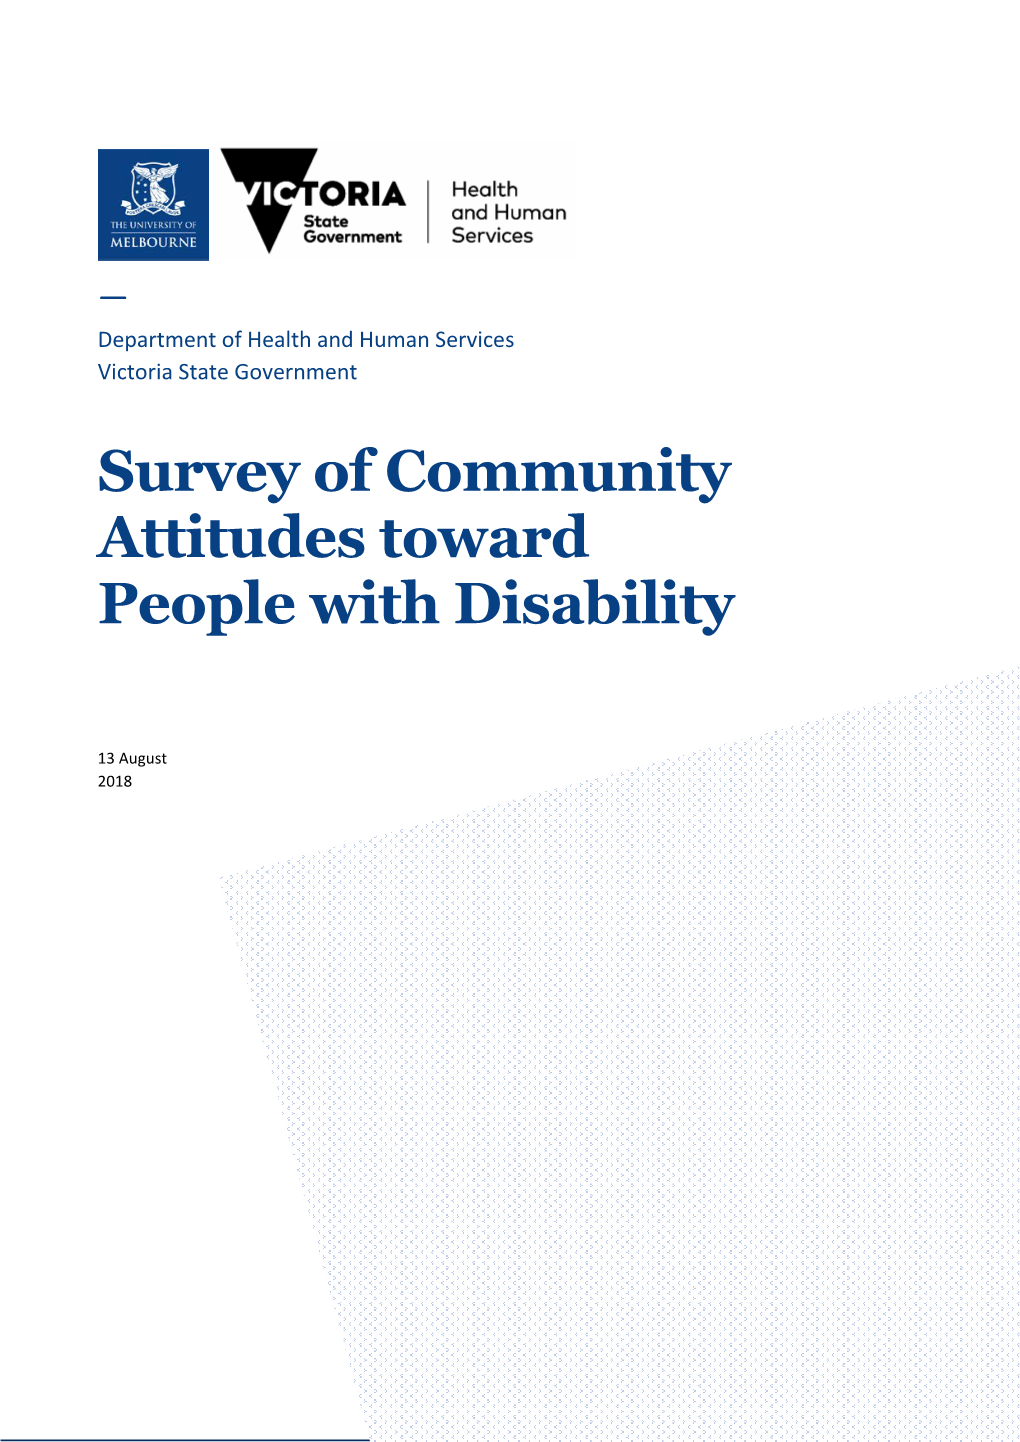 Survey of Community Attitudes Toward People with Disability